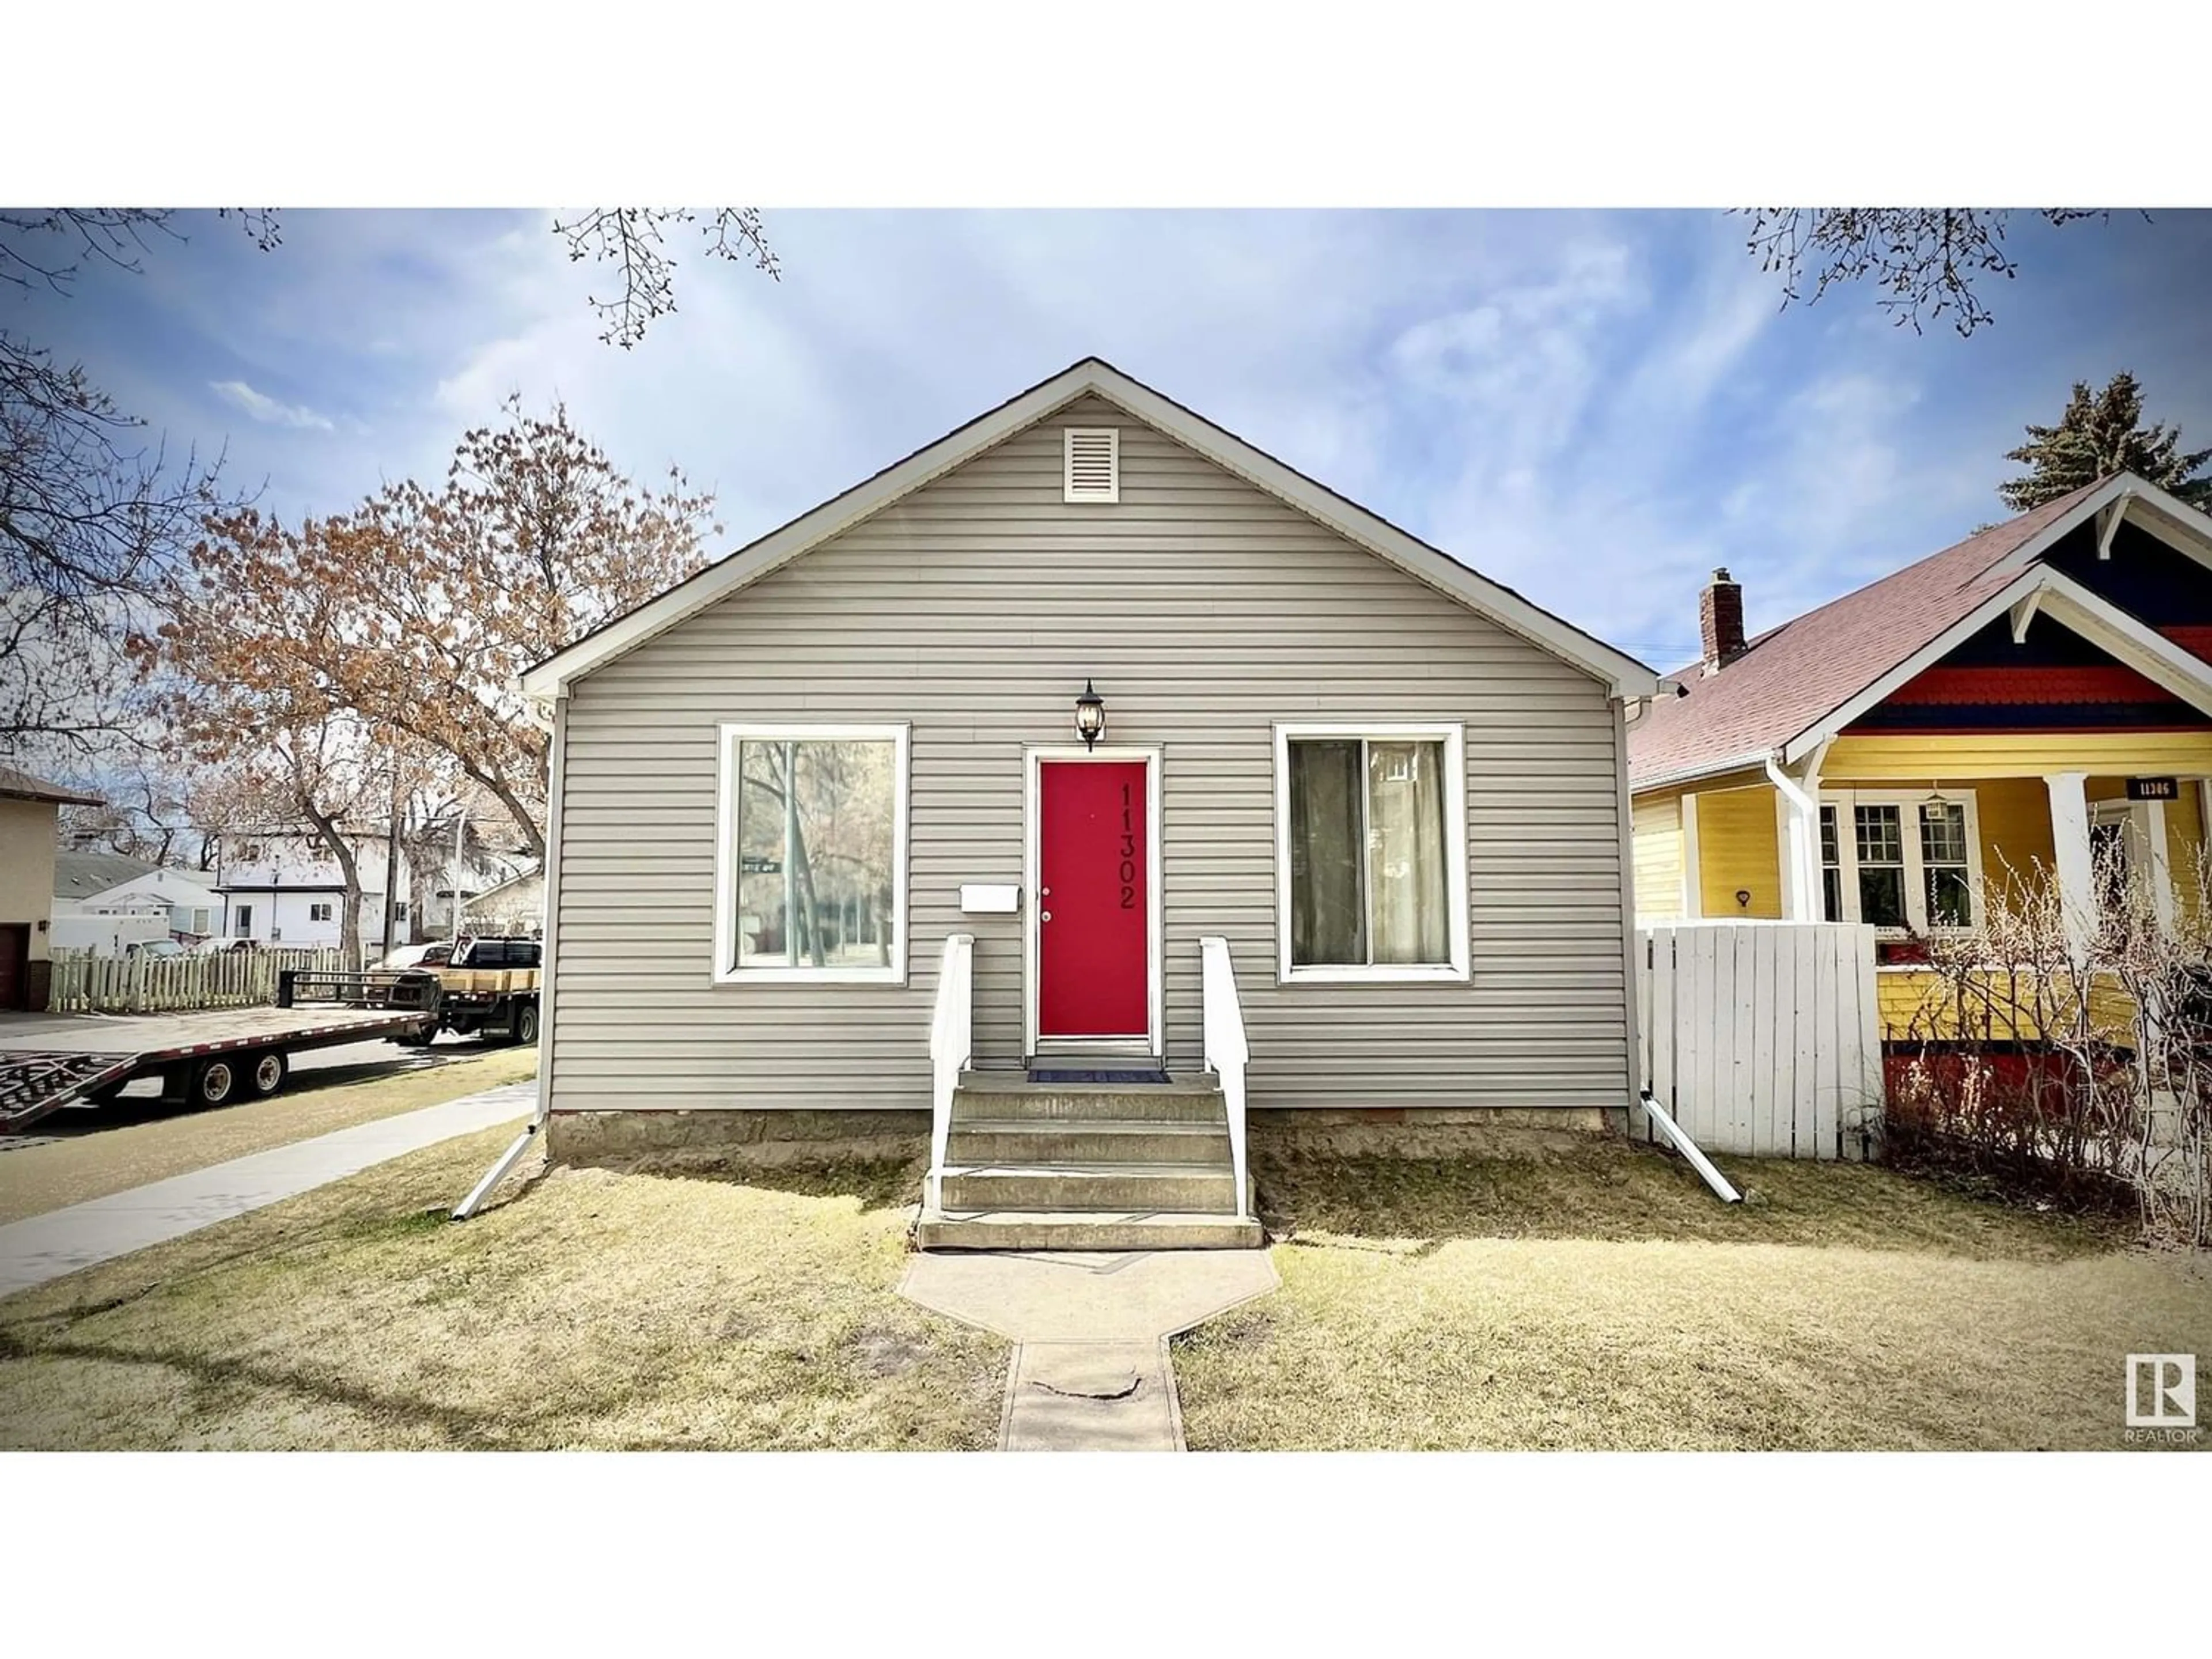 Frontside or backside of a home for 11302 96 ST NW, Edmonton Alberta T5G1T3